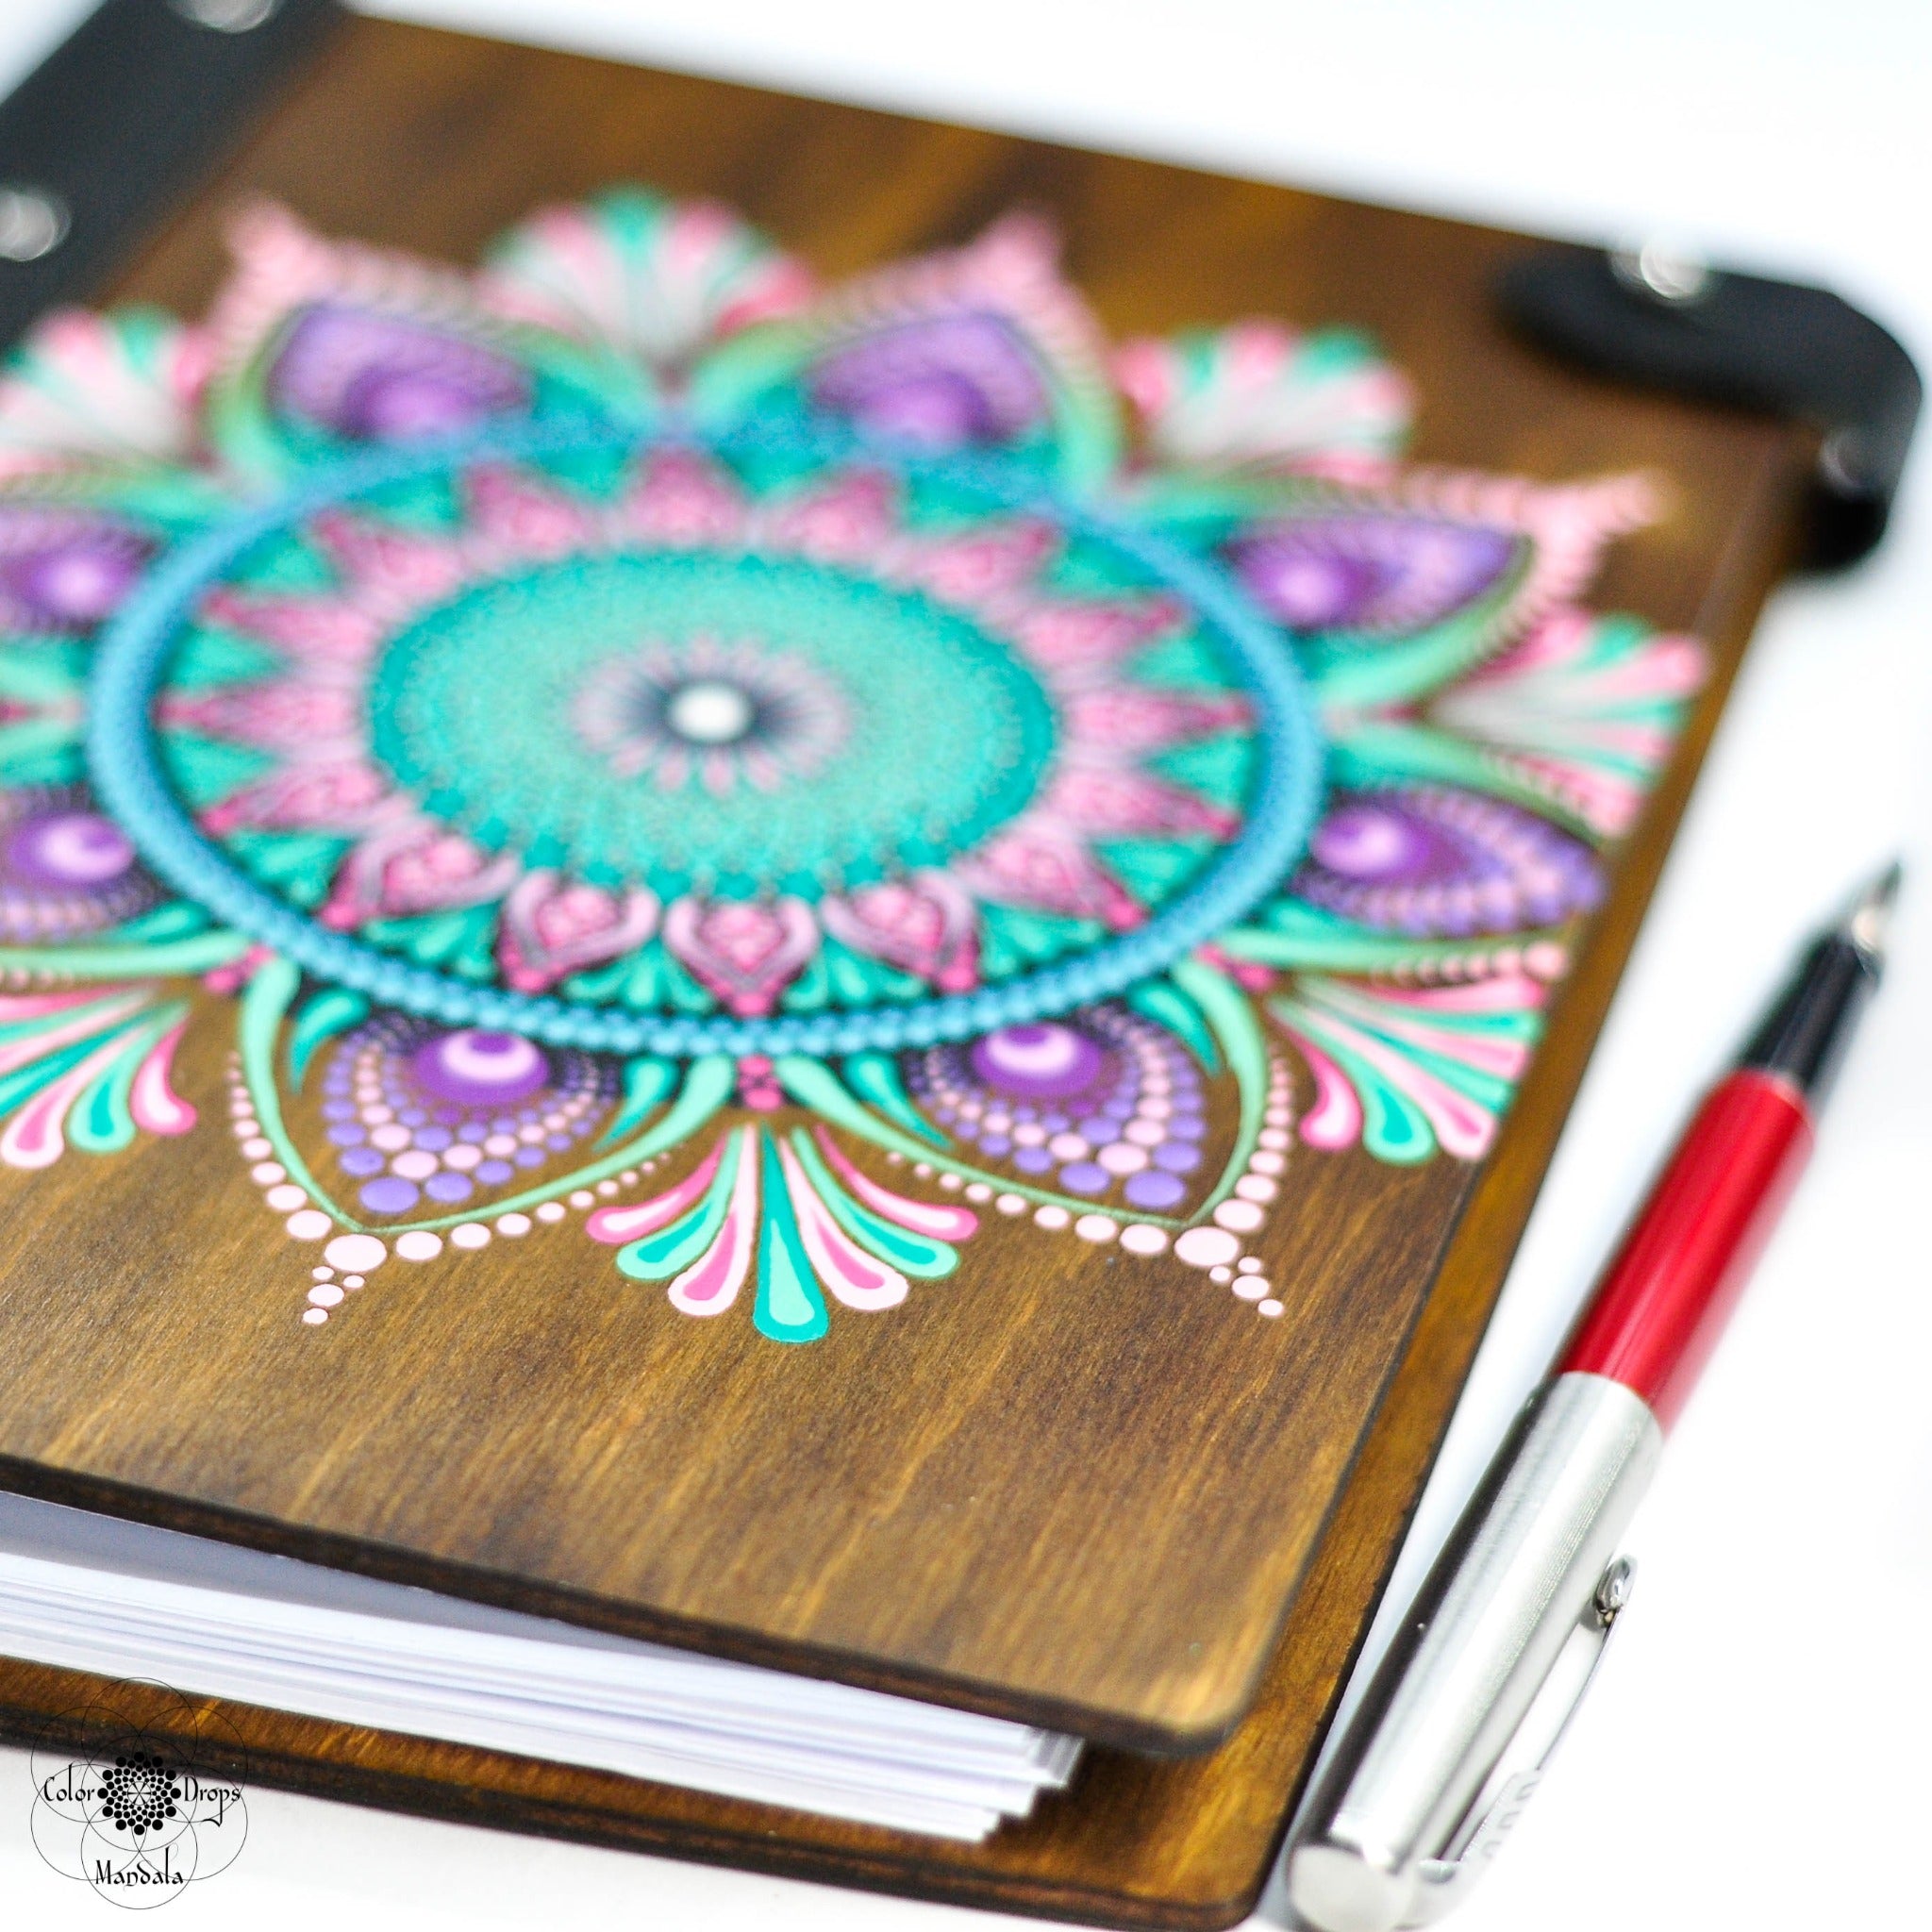 "Free spirit" hand-painted refillable diary